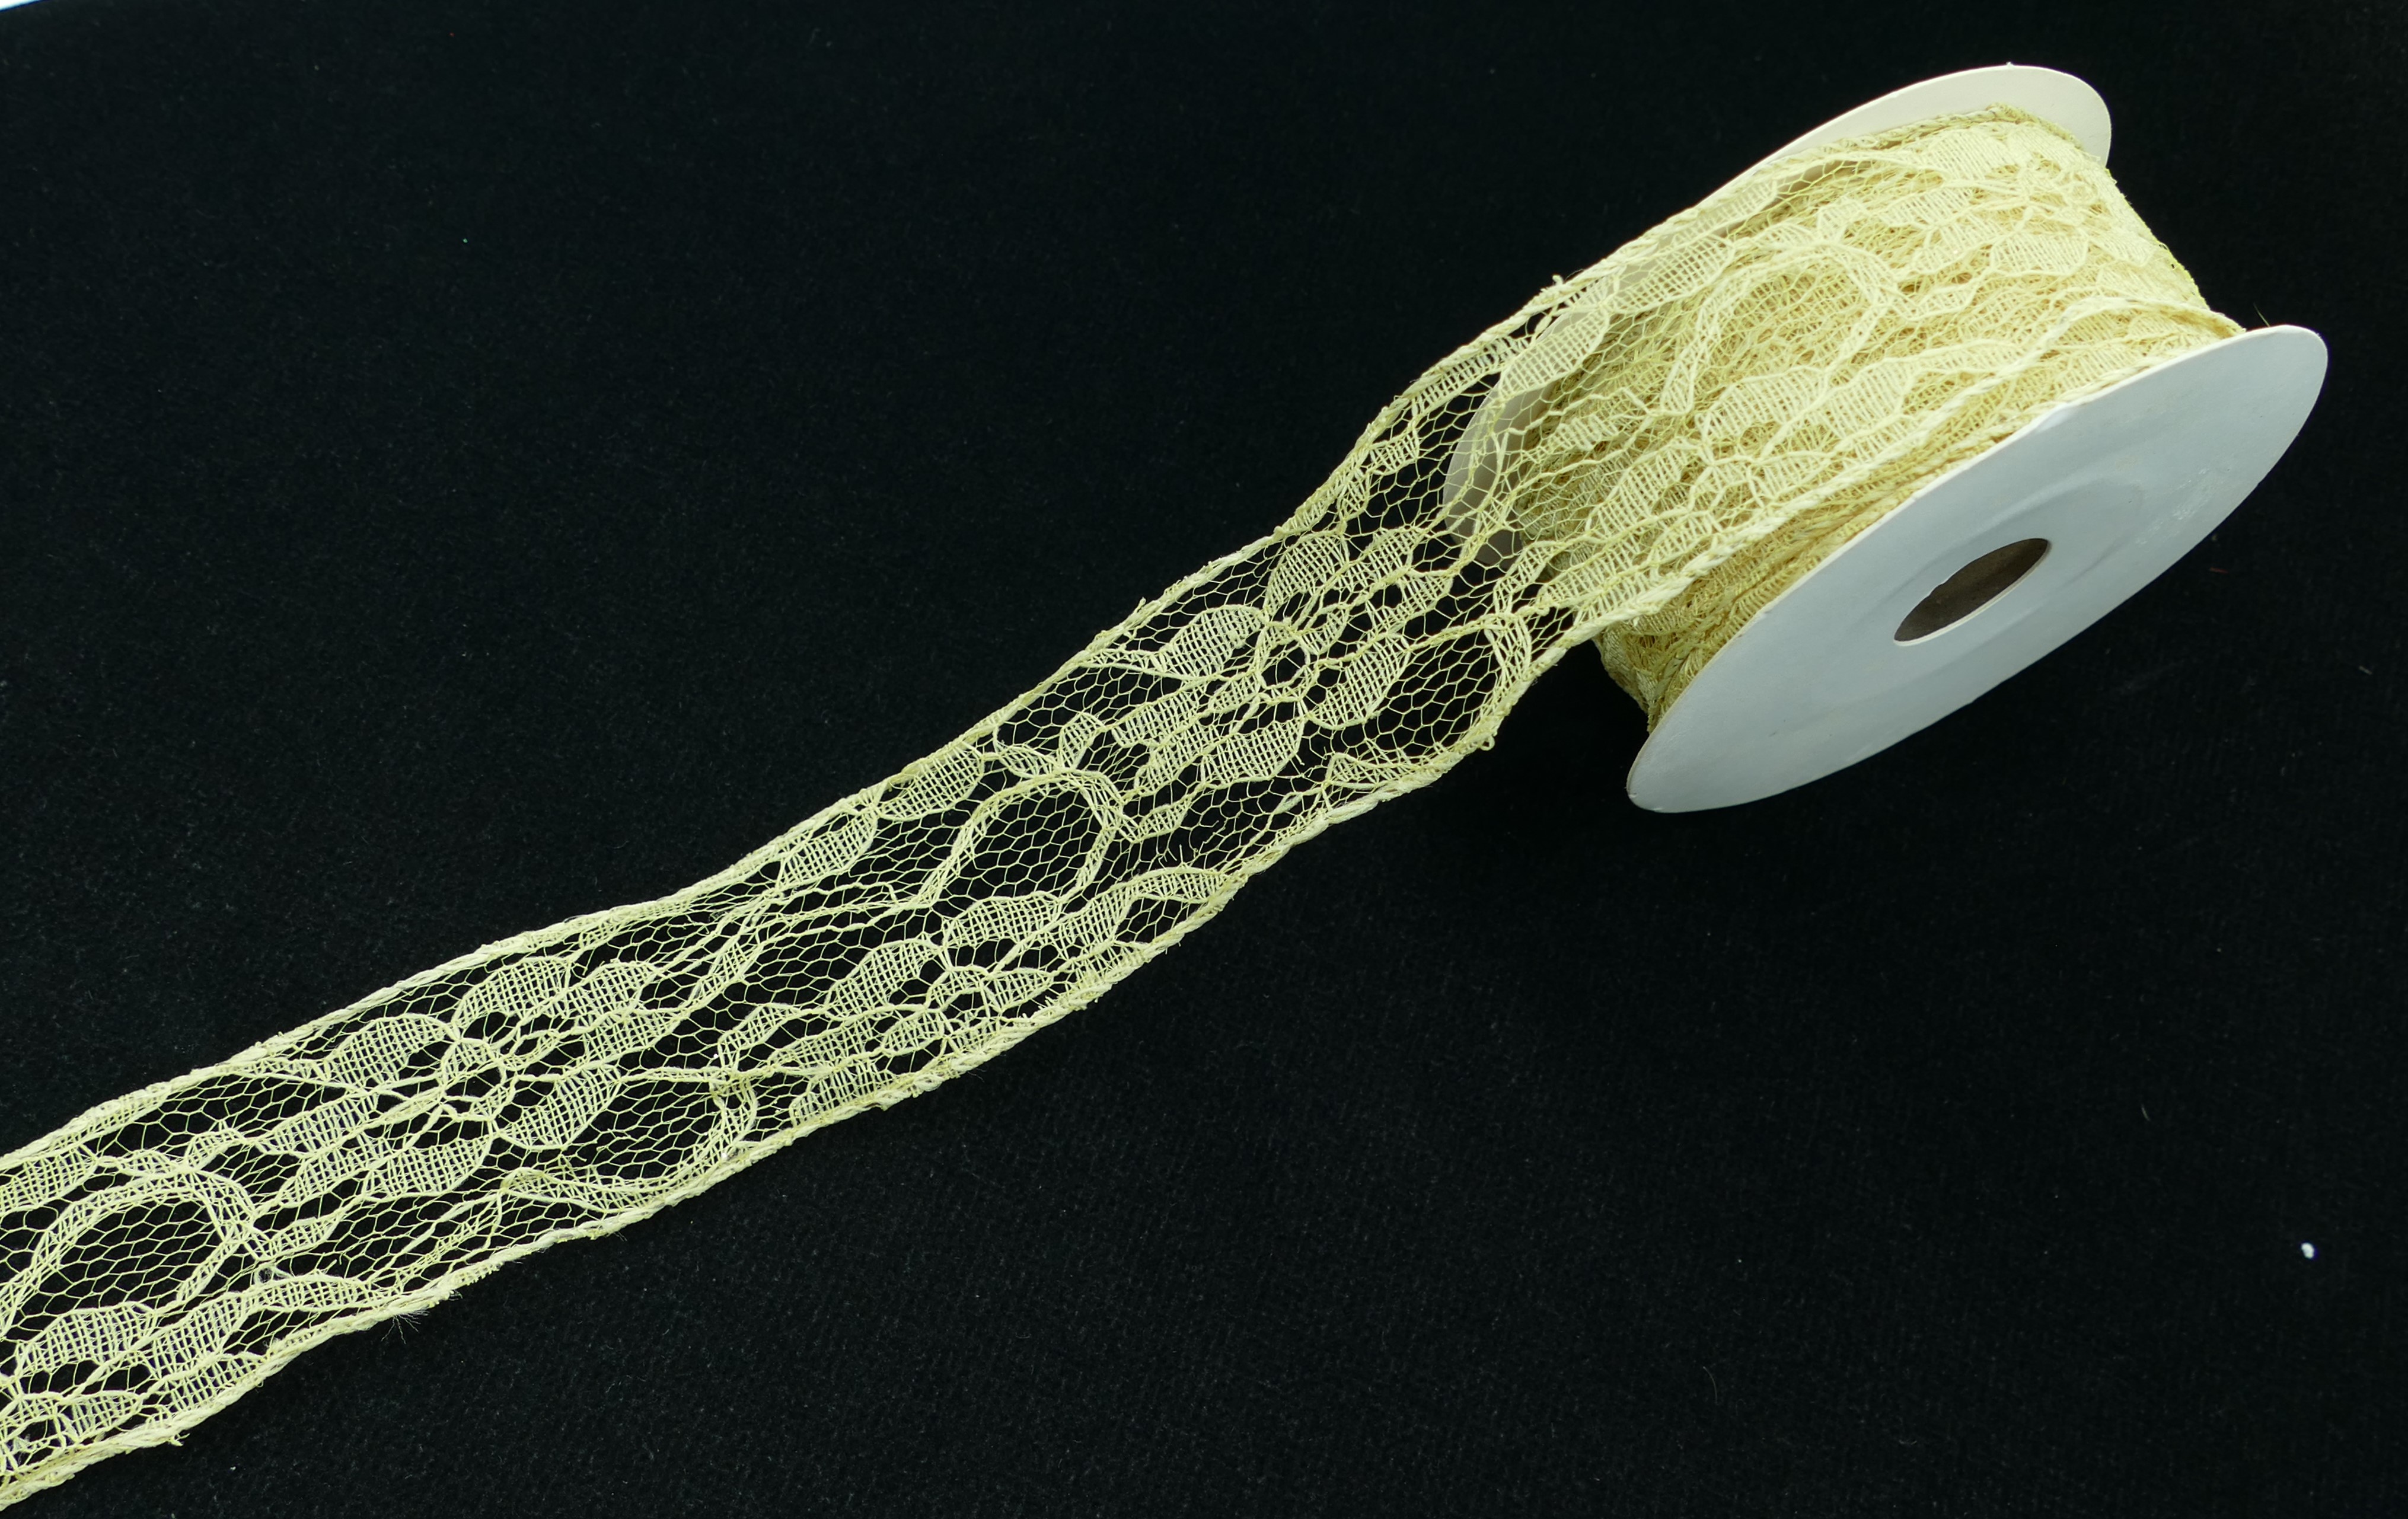 Lace Ribbon in Ivory - 4 Wide x 10 yds.